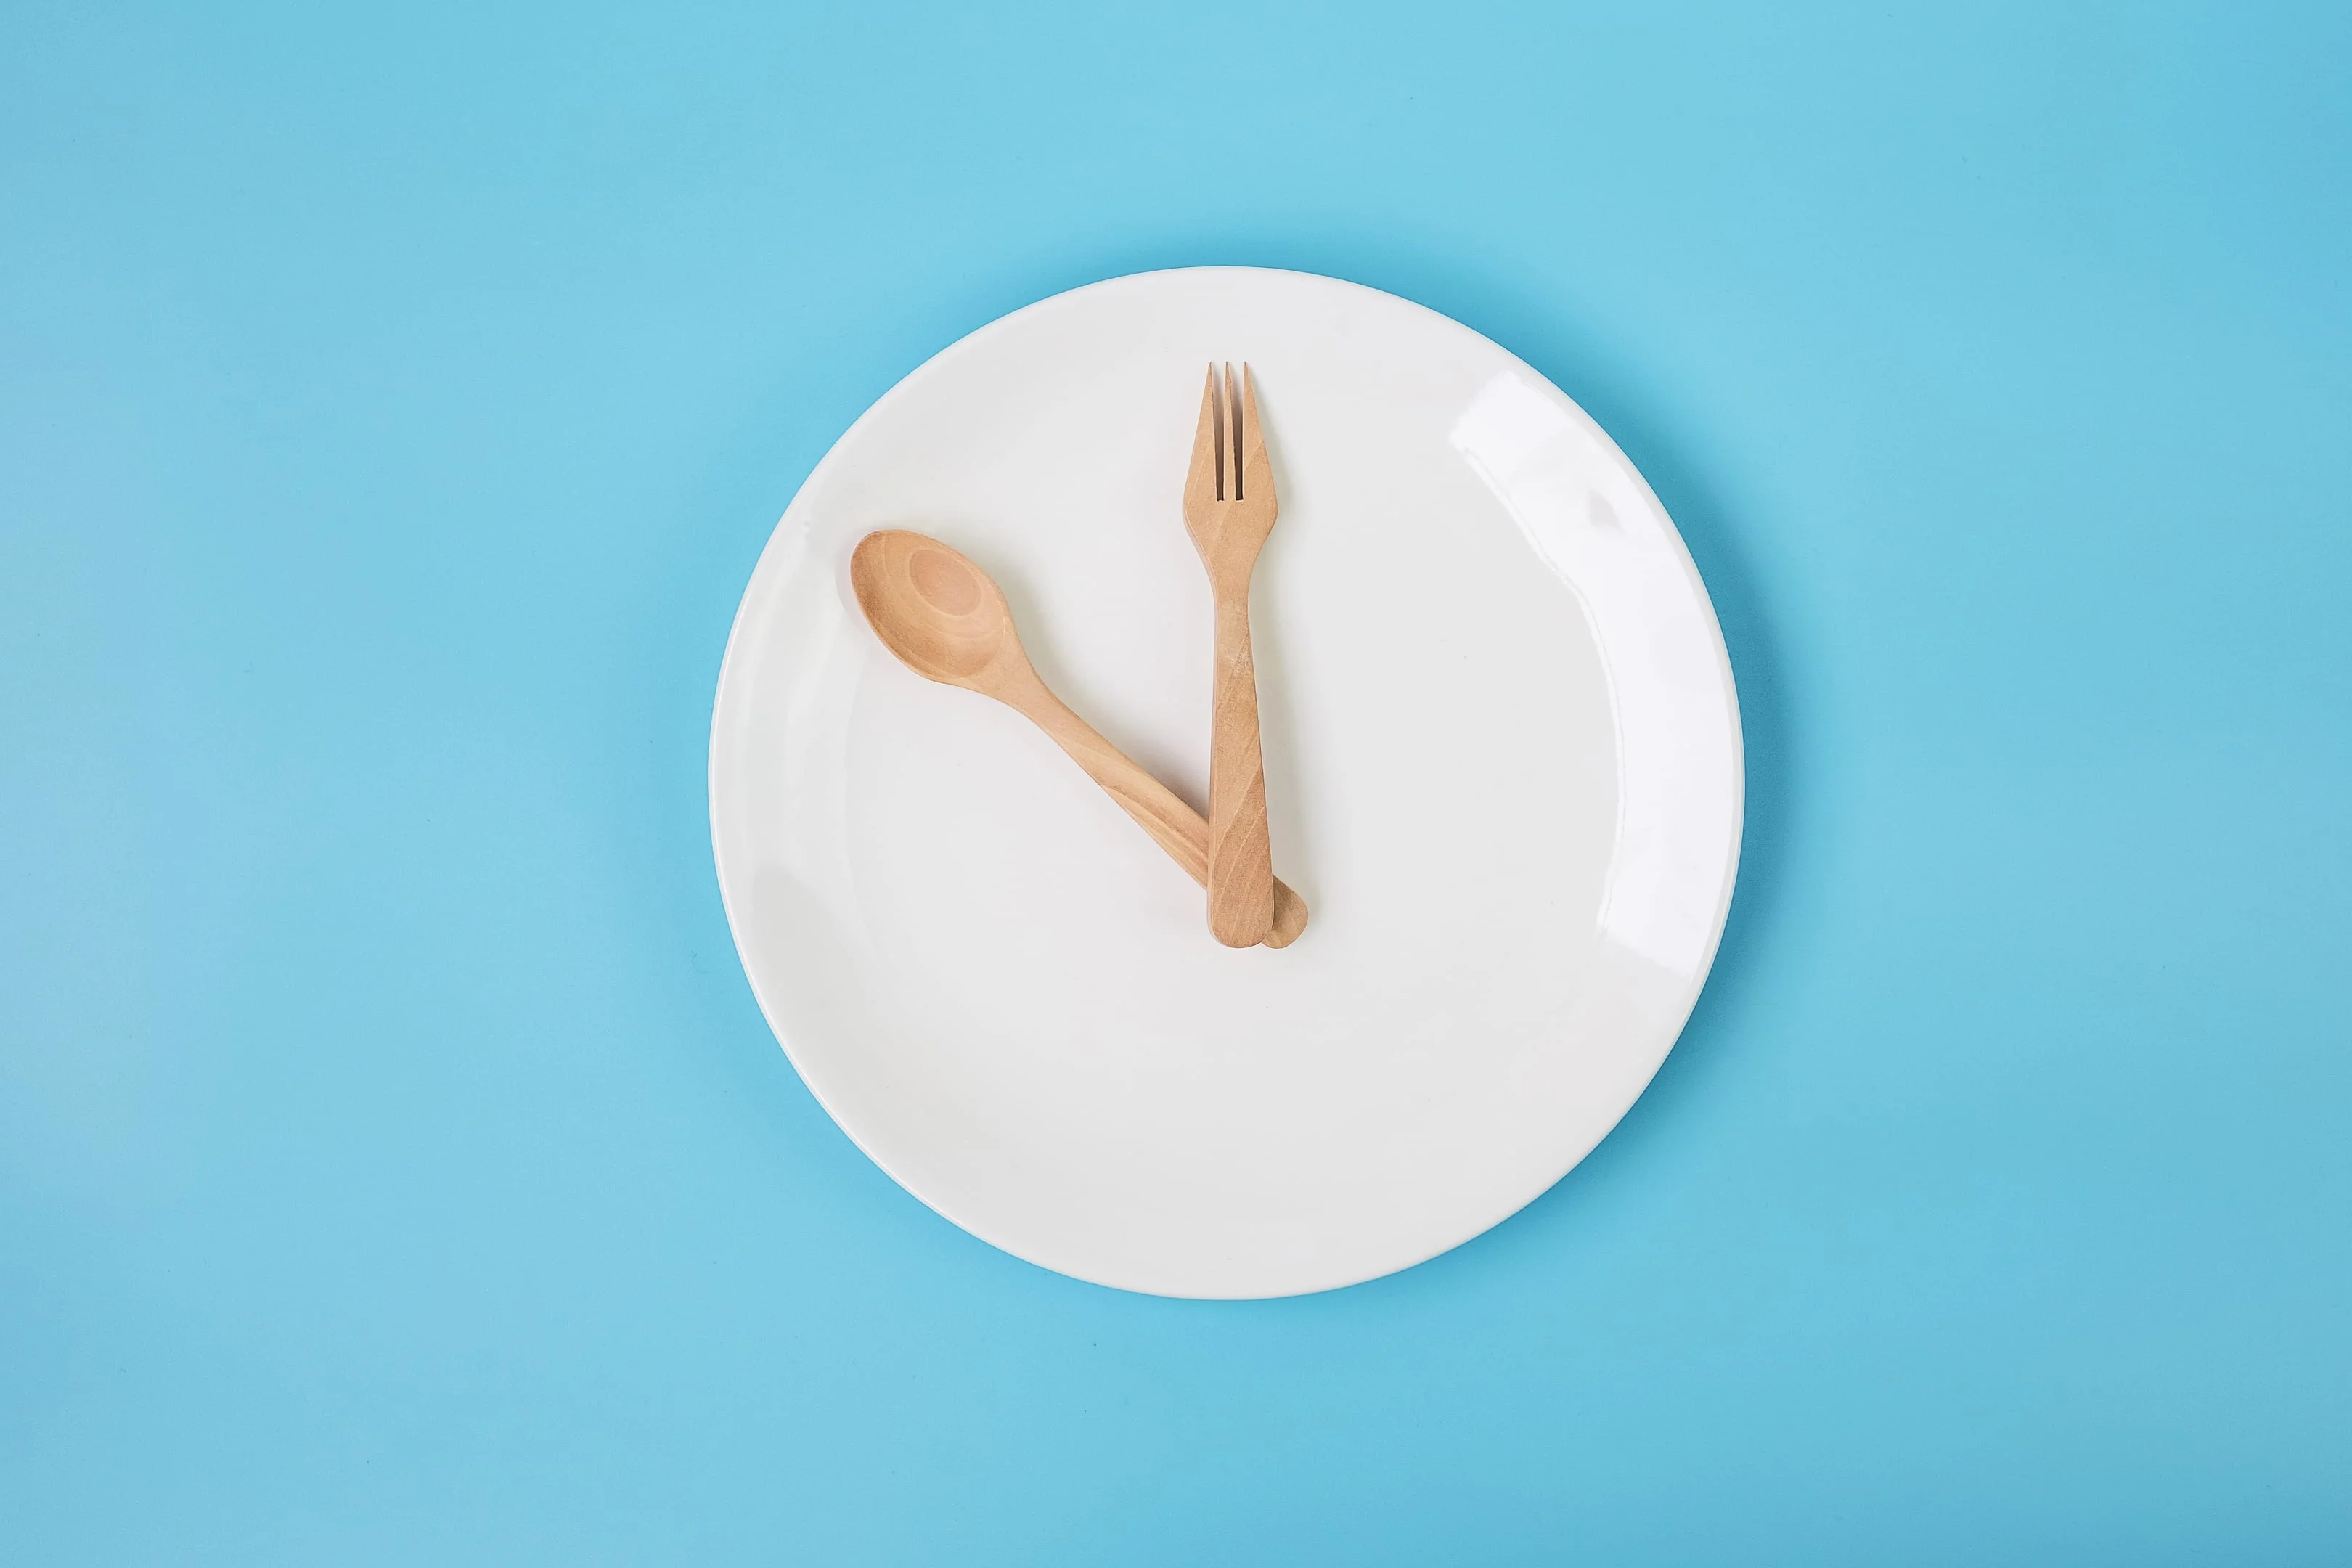 Intermittent fasting and dieting food concept